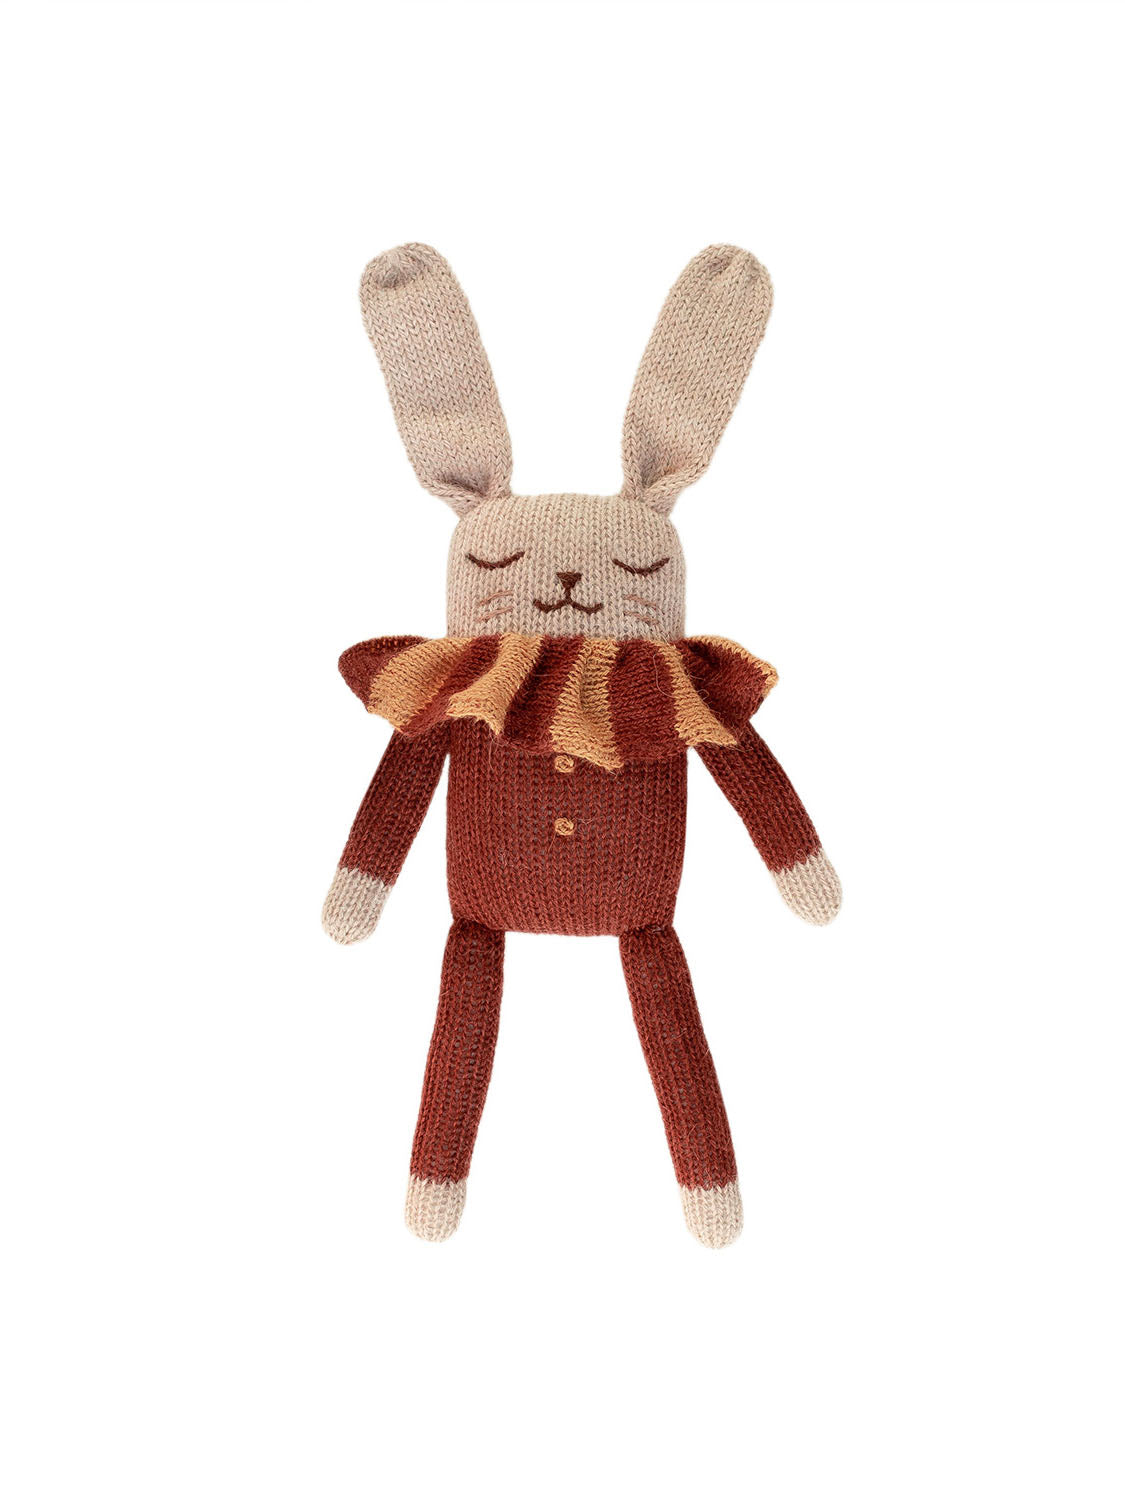 Bunny with Sienna Striped Collar